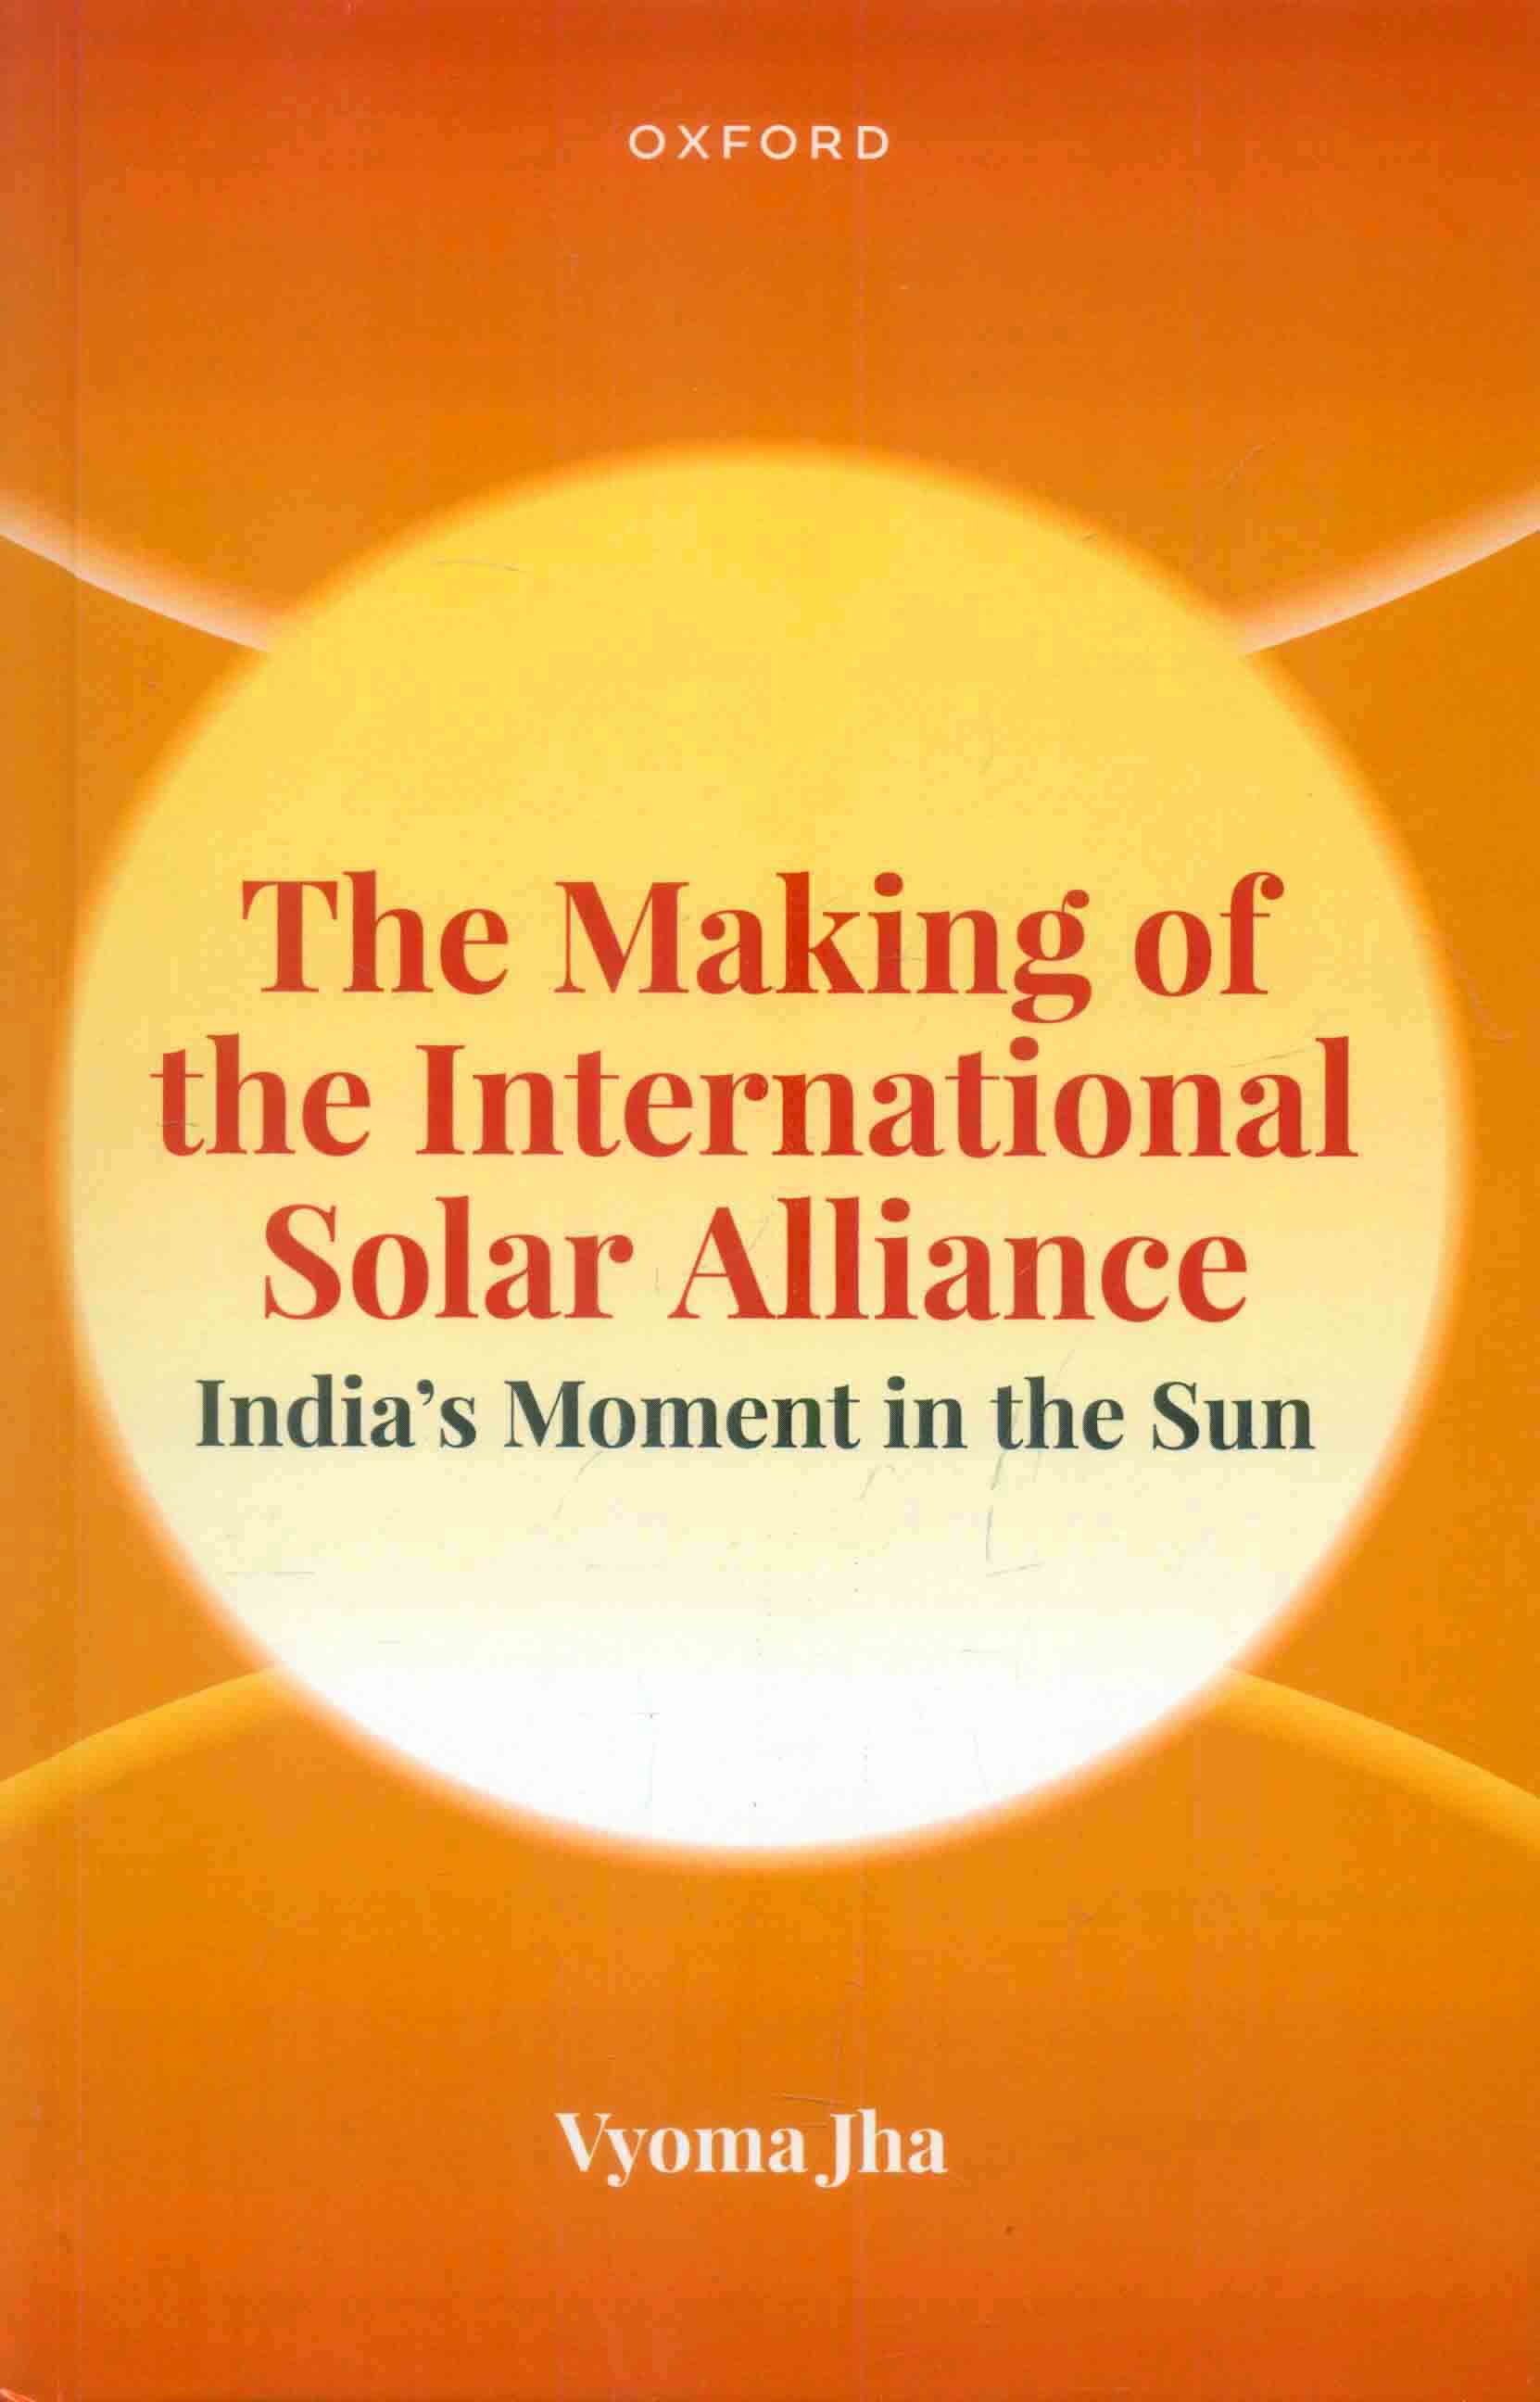 The making of the international solar alliance: India's moment in the Sun